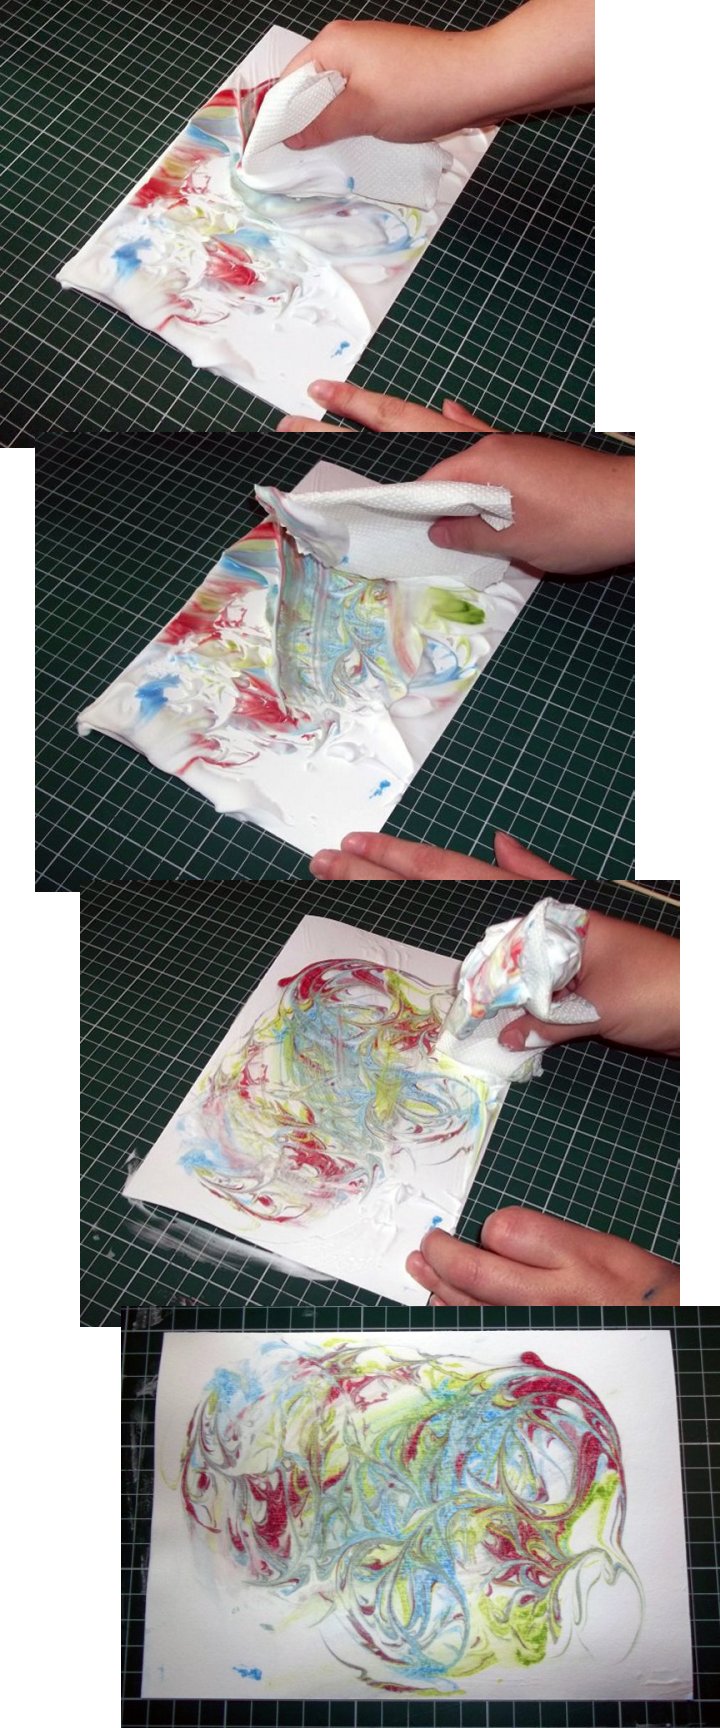 Things to make and do - Marbling with Shaving Foam